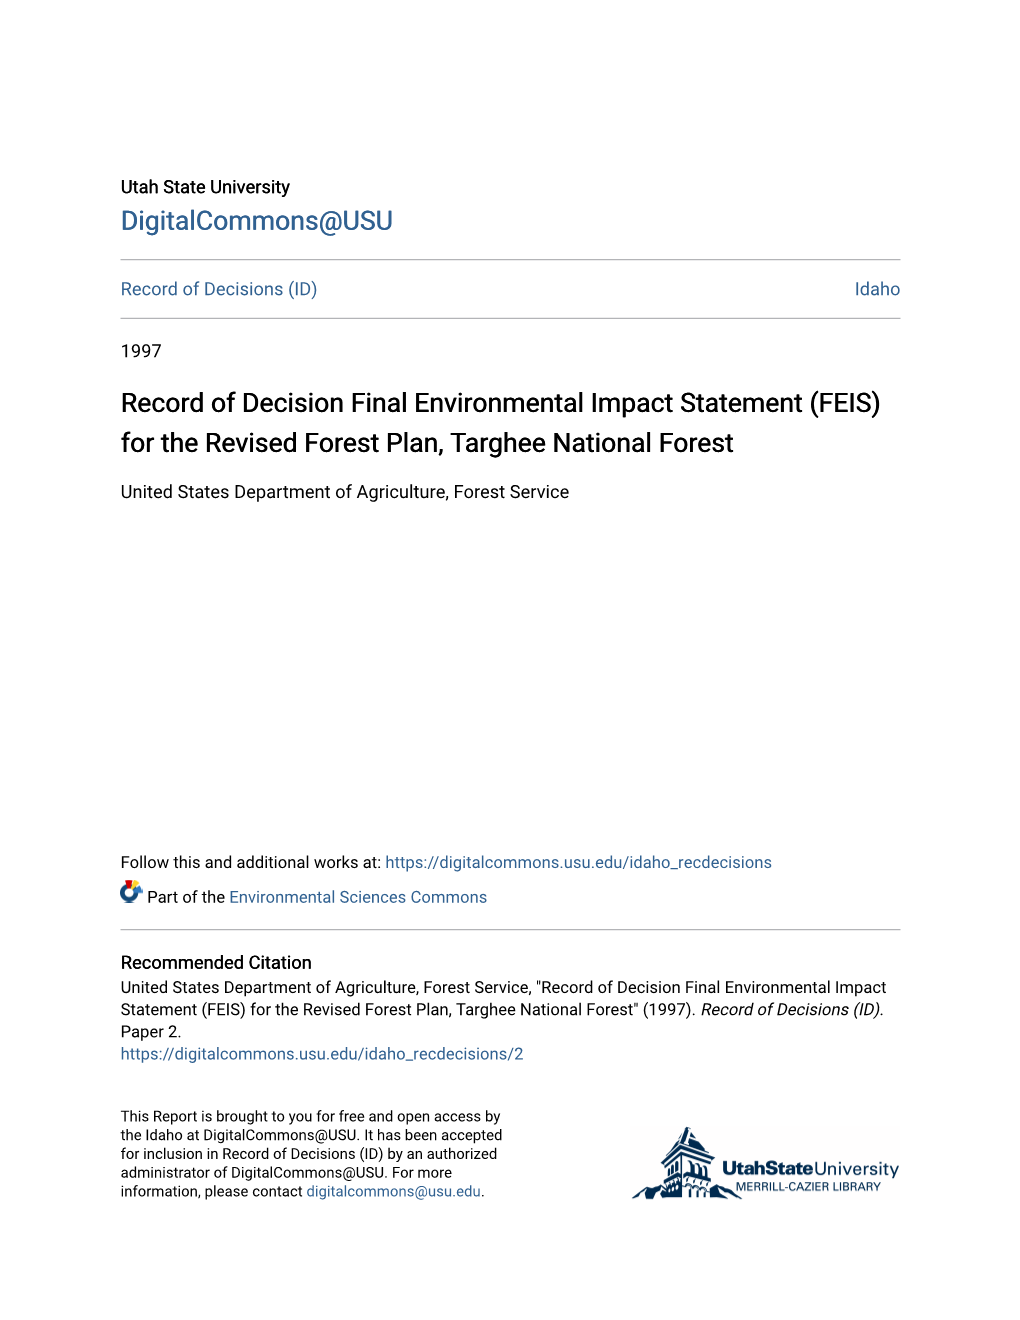 Record of Decision Final Environmental Impact Statement (FEIS) for the Revised Forest Plan, Targhee National Forest